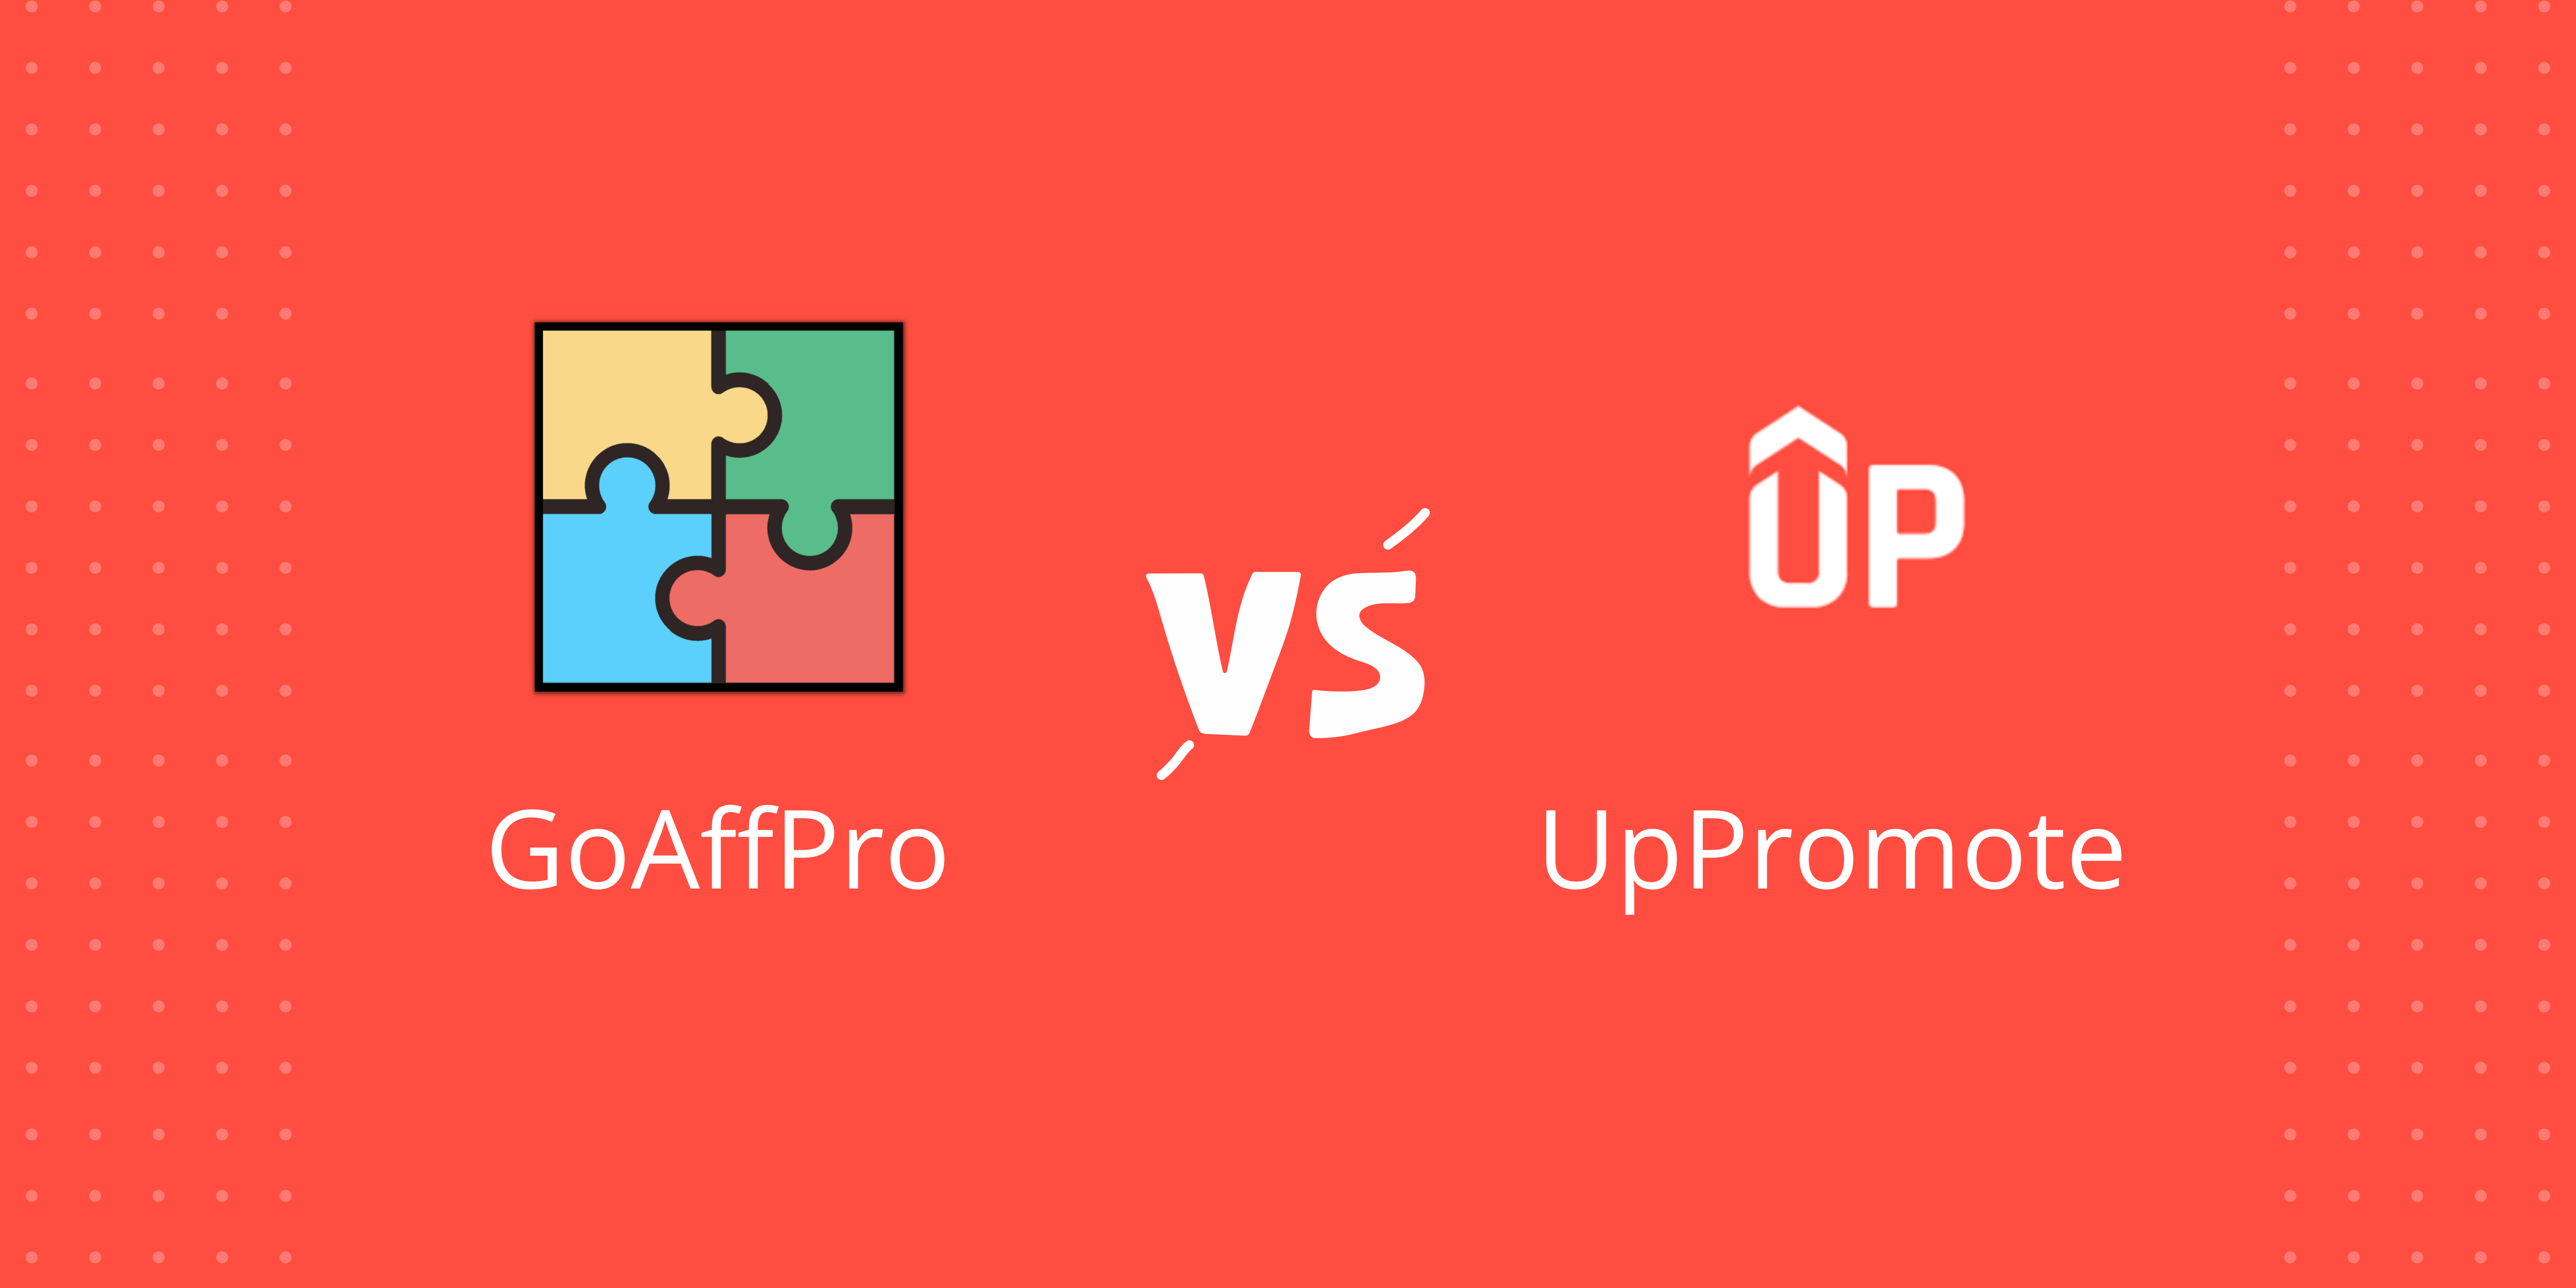 GoAffPro vs UpPromote: Which Is the Better Affiliate Marketing Platform?